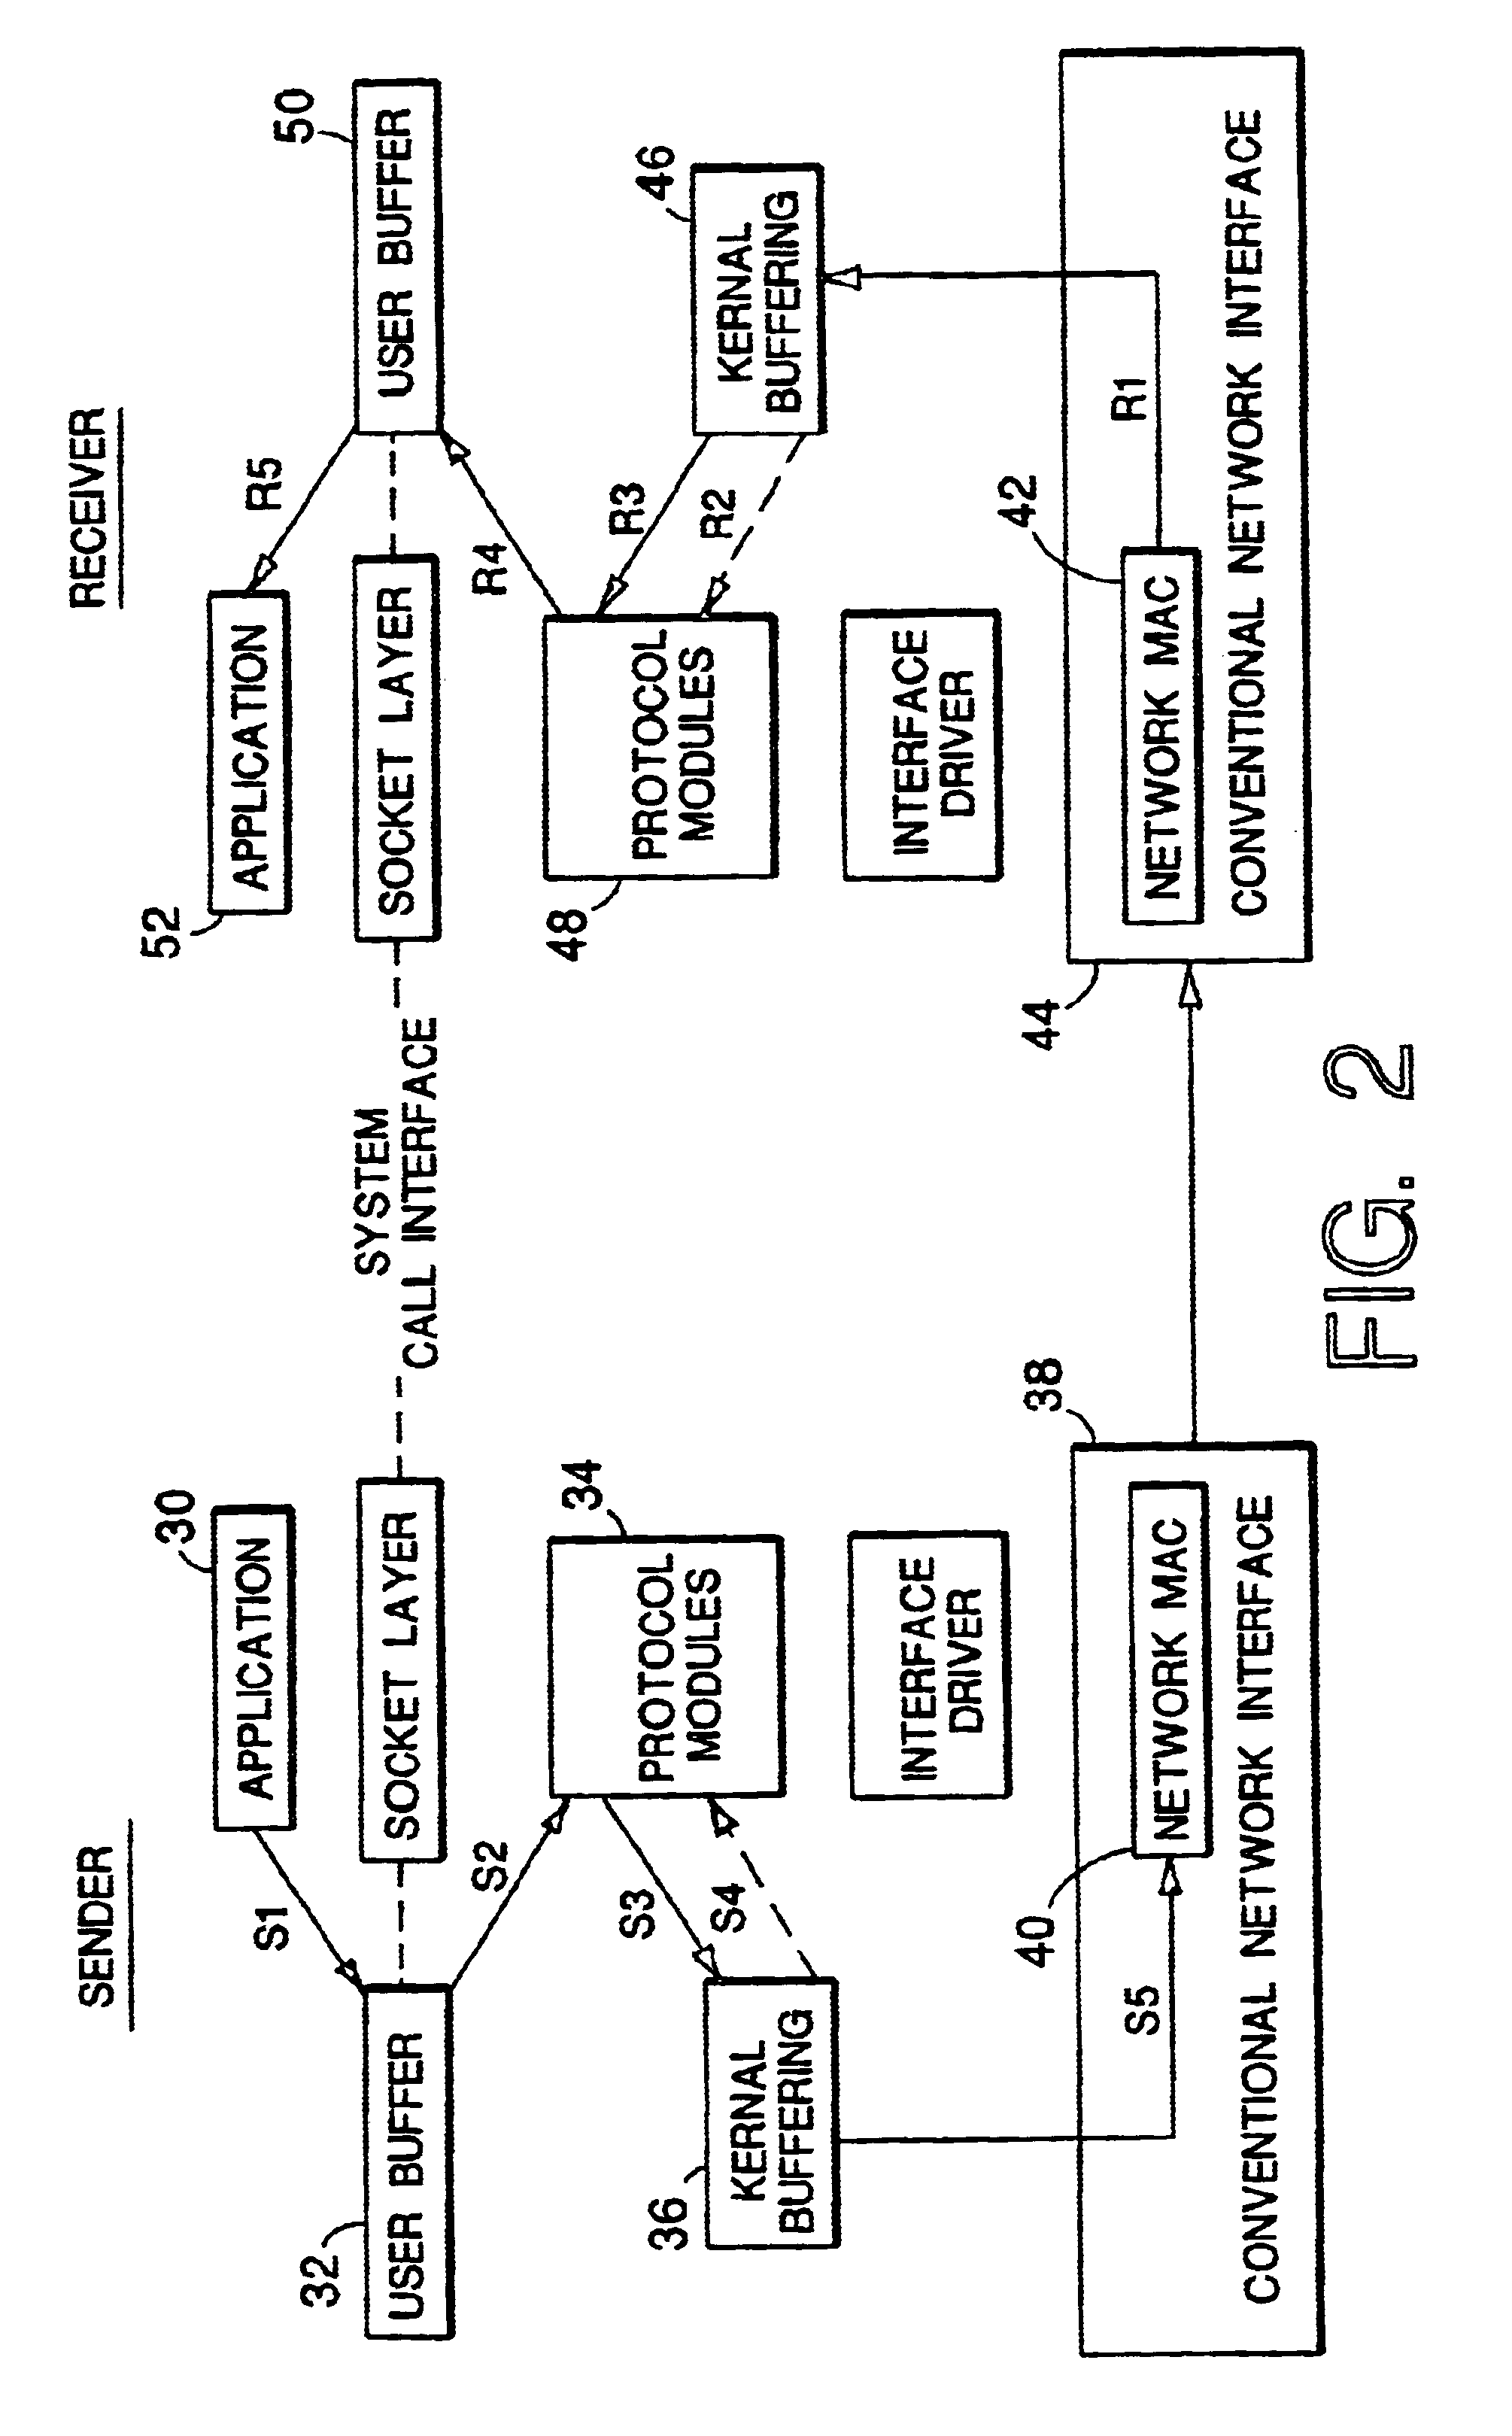 Data reconciliation between a computer and a mobile data collection terminal